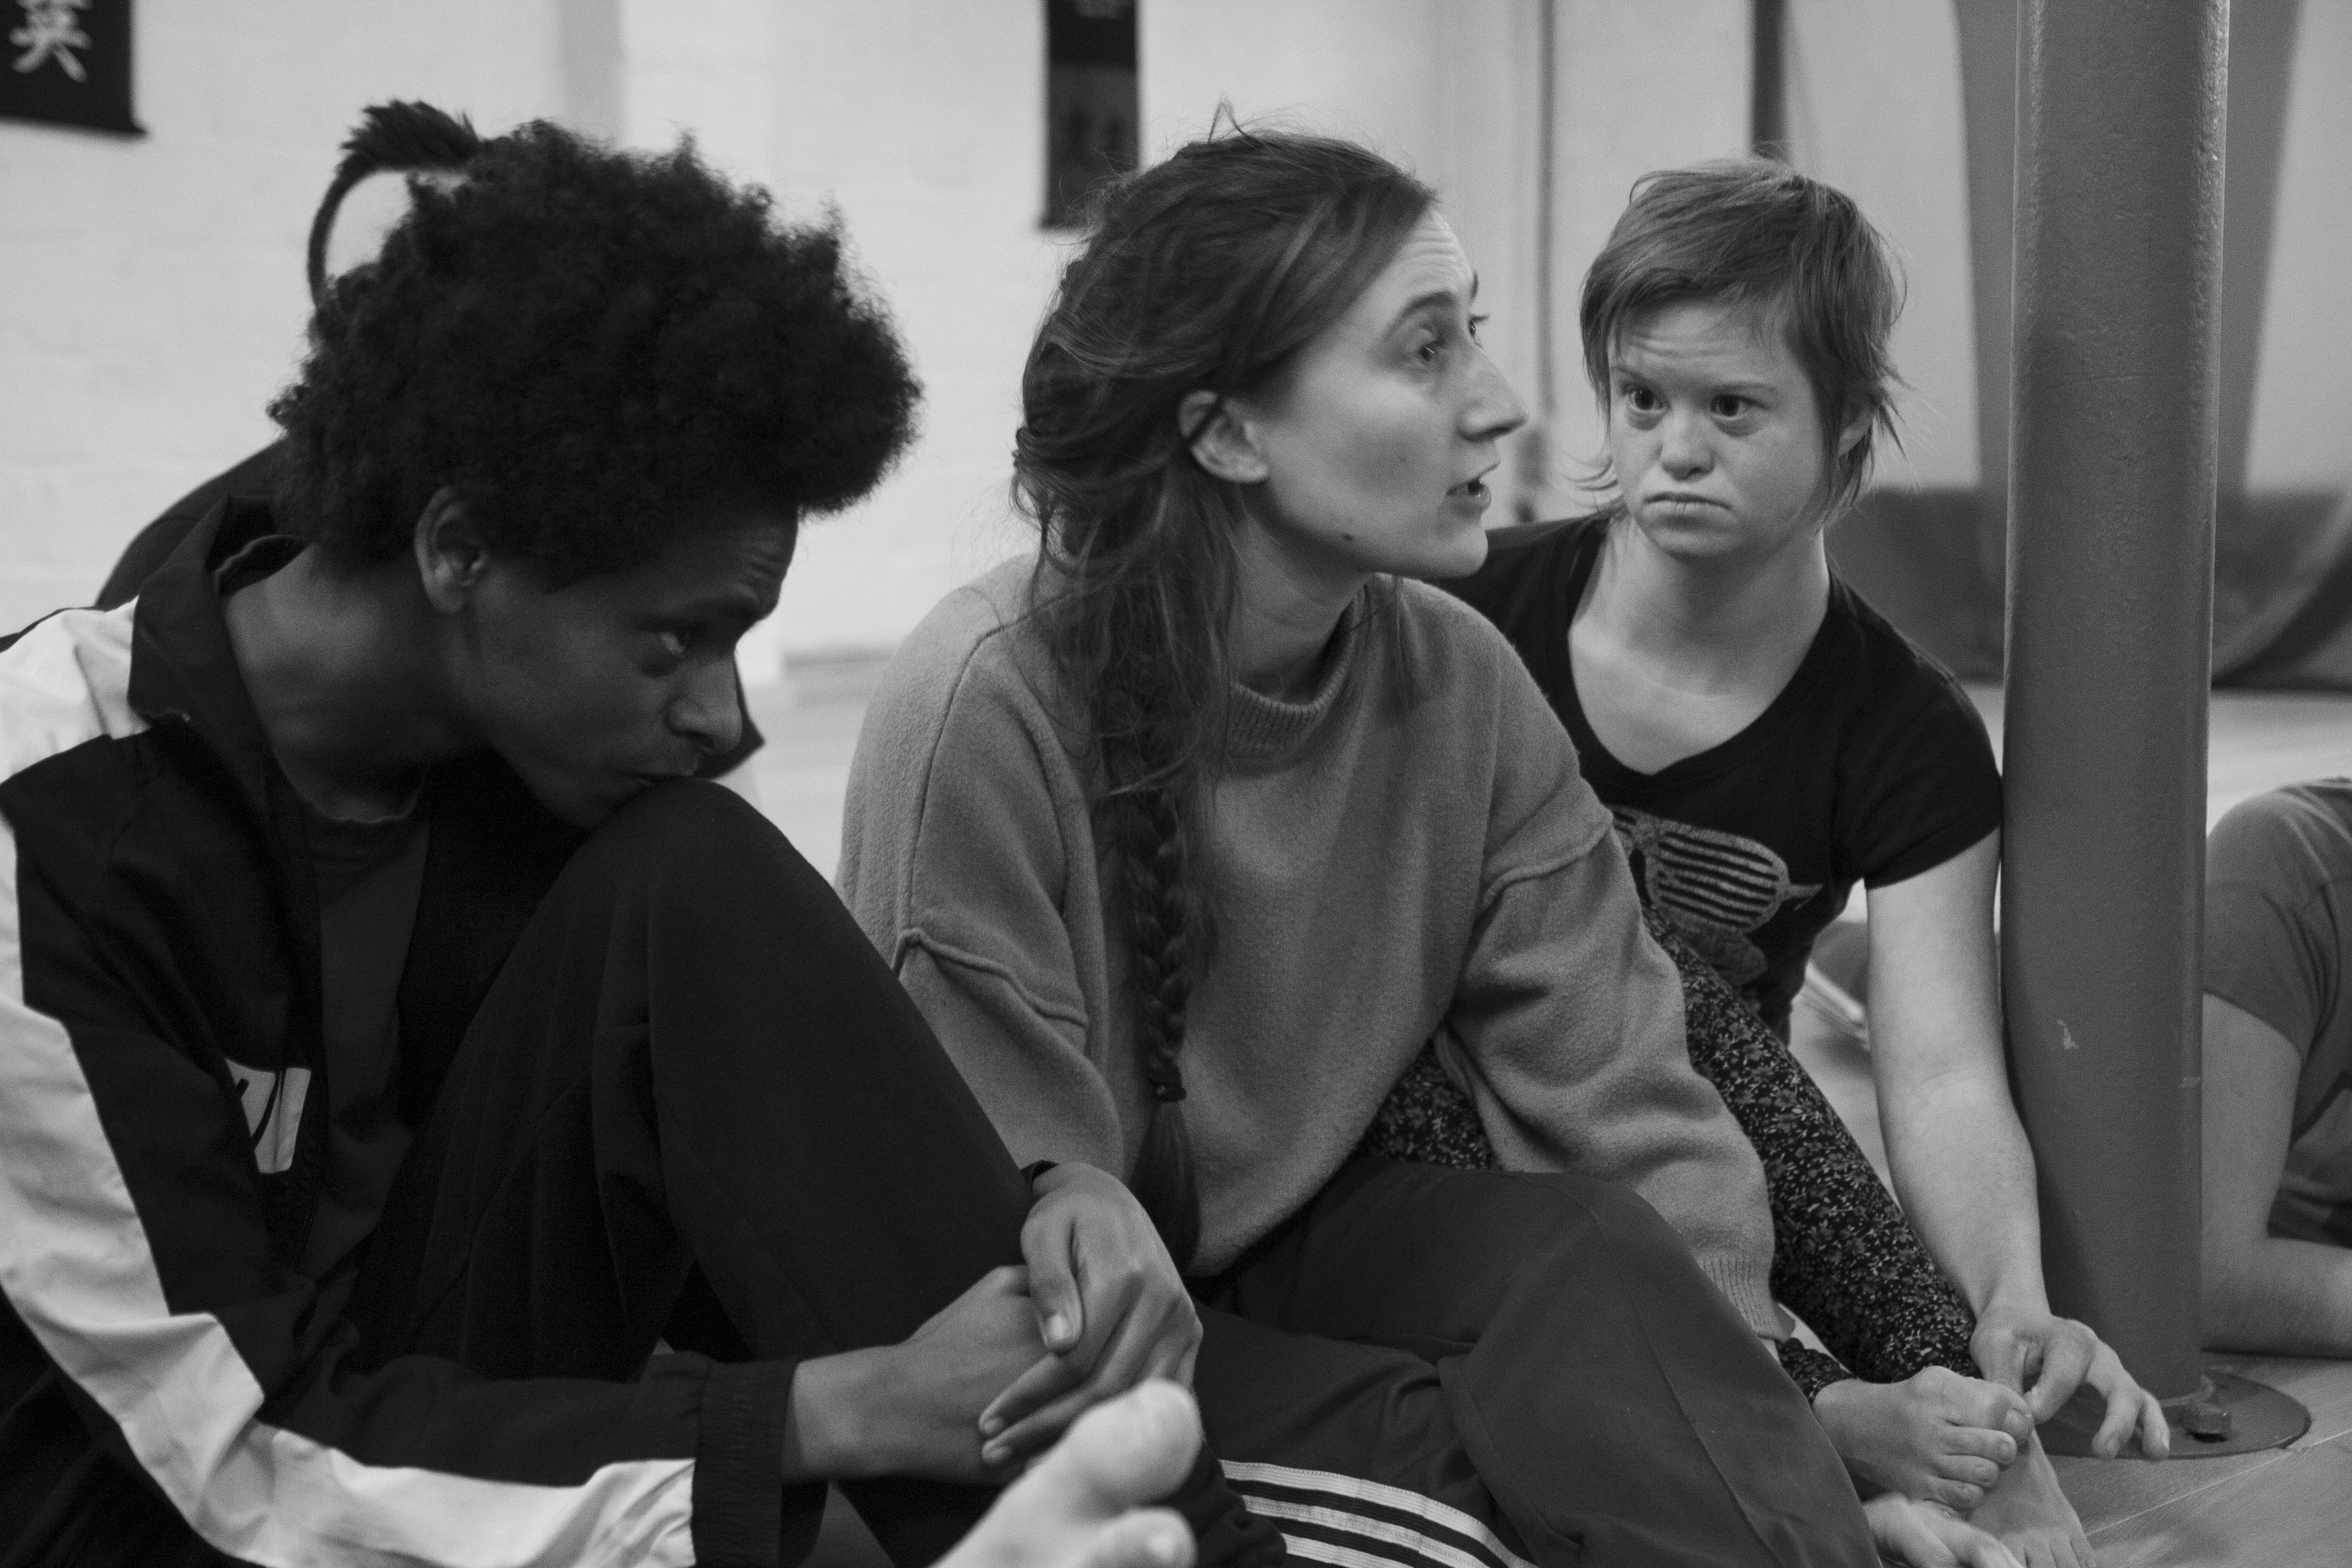 Three people sitting on a floor in a dance studio. The woman sitting in the middle is explaining something.